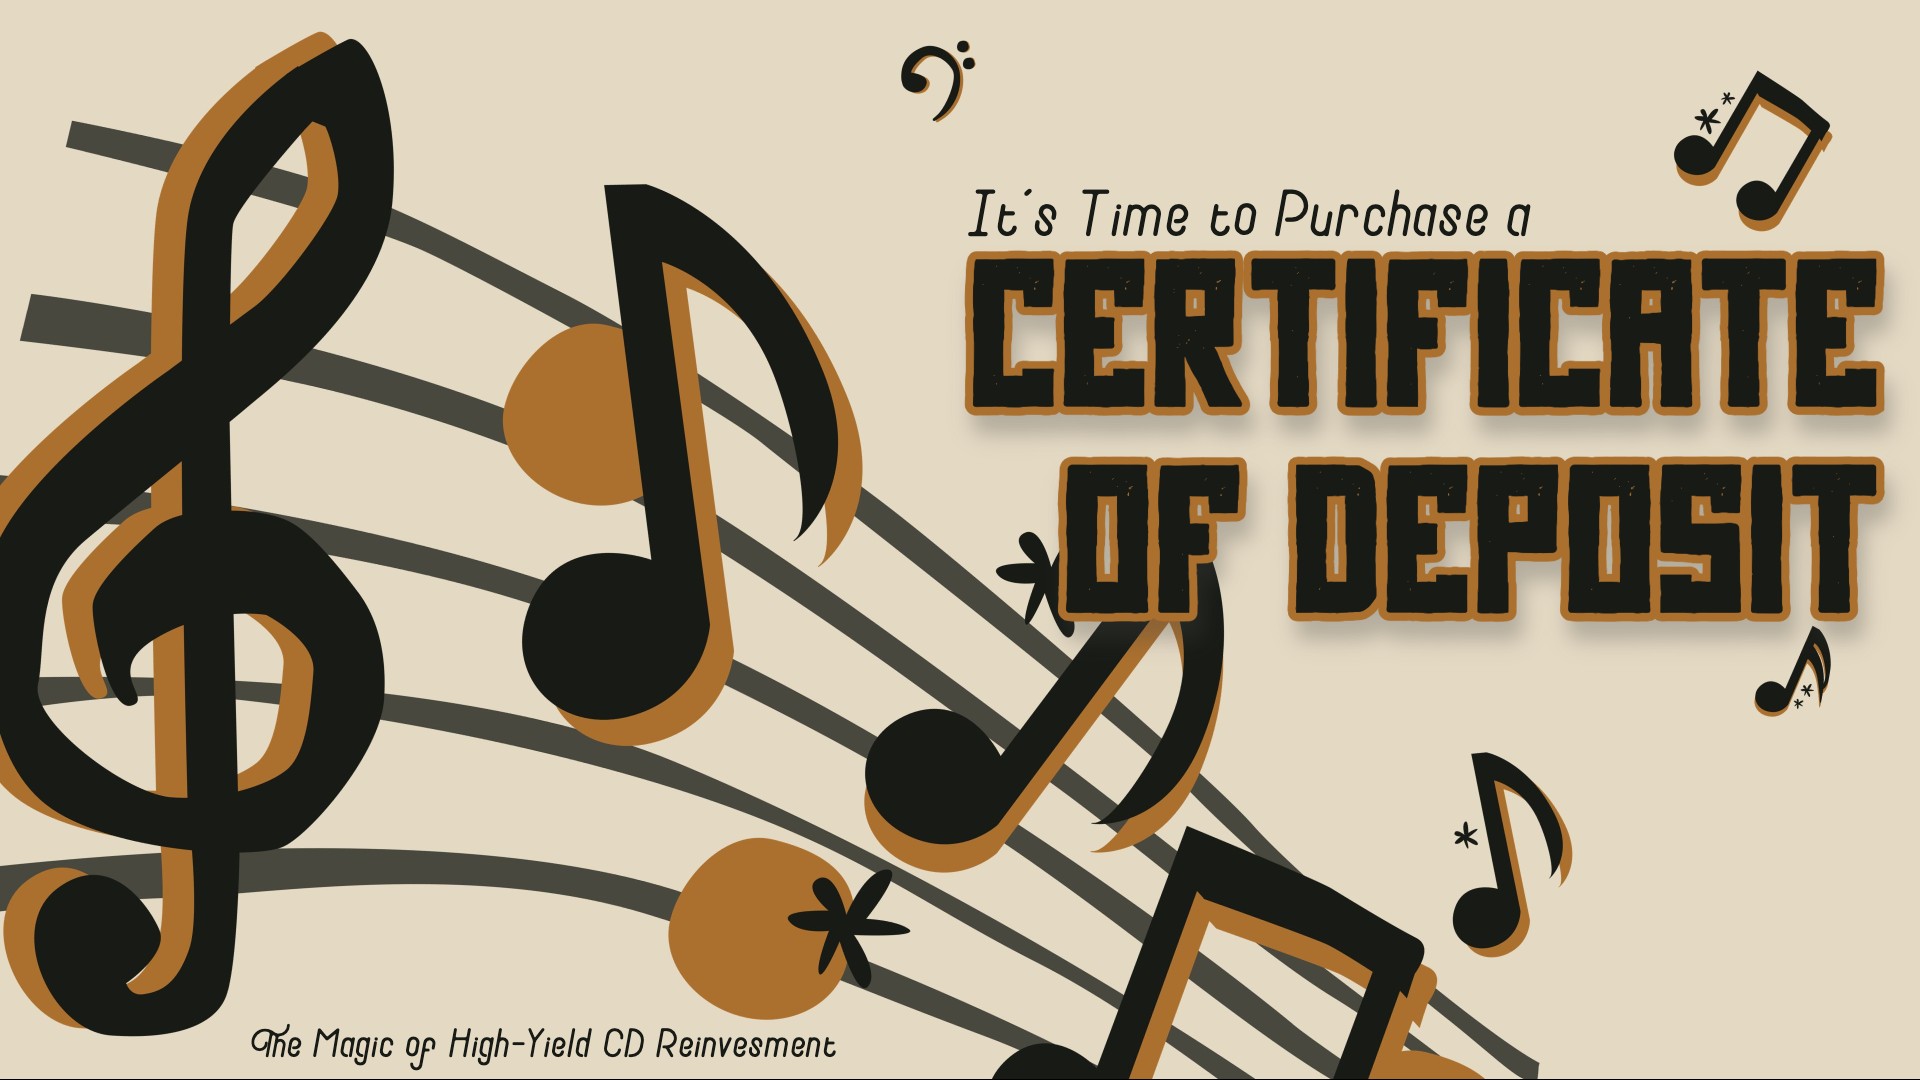 It’s Time to Purchase a Certificate of Deposit: The Magic of High-Yield CD Reinvestment